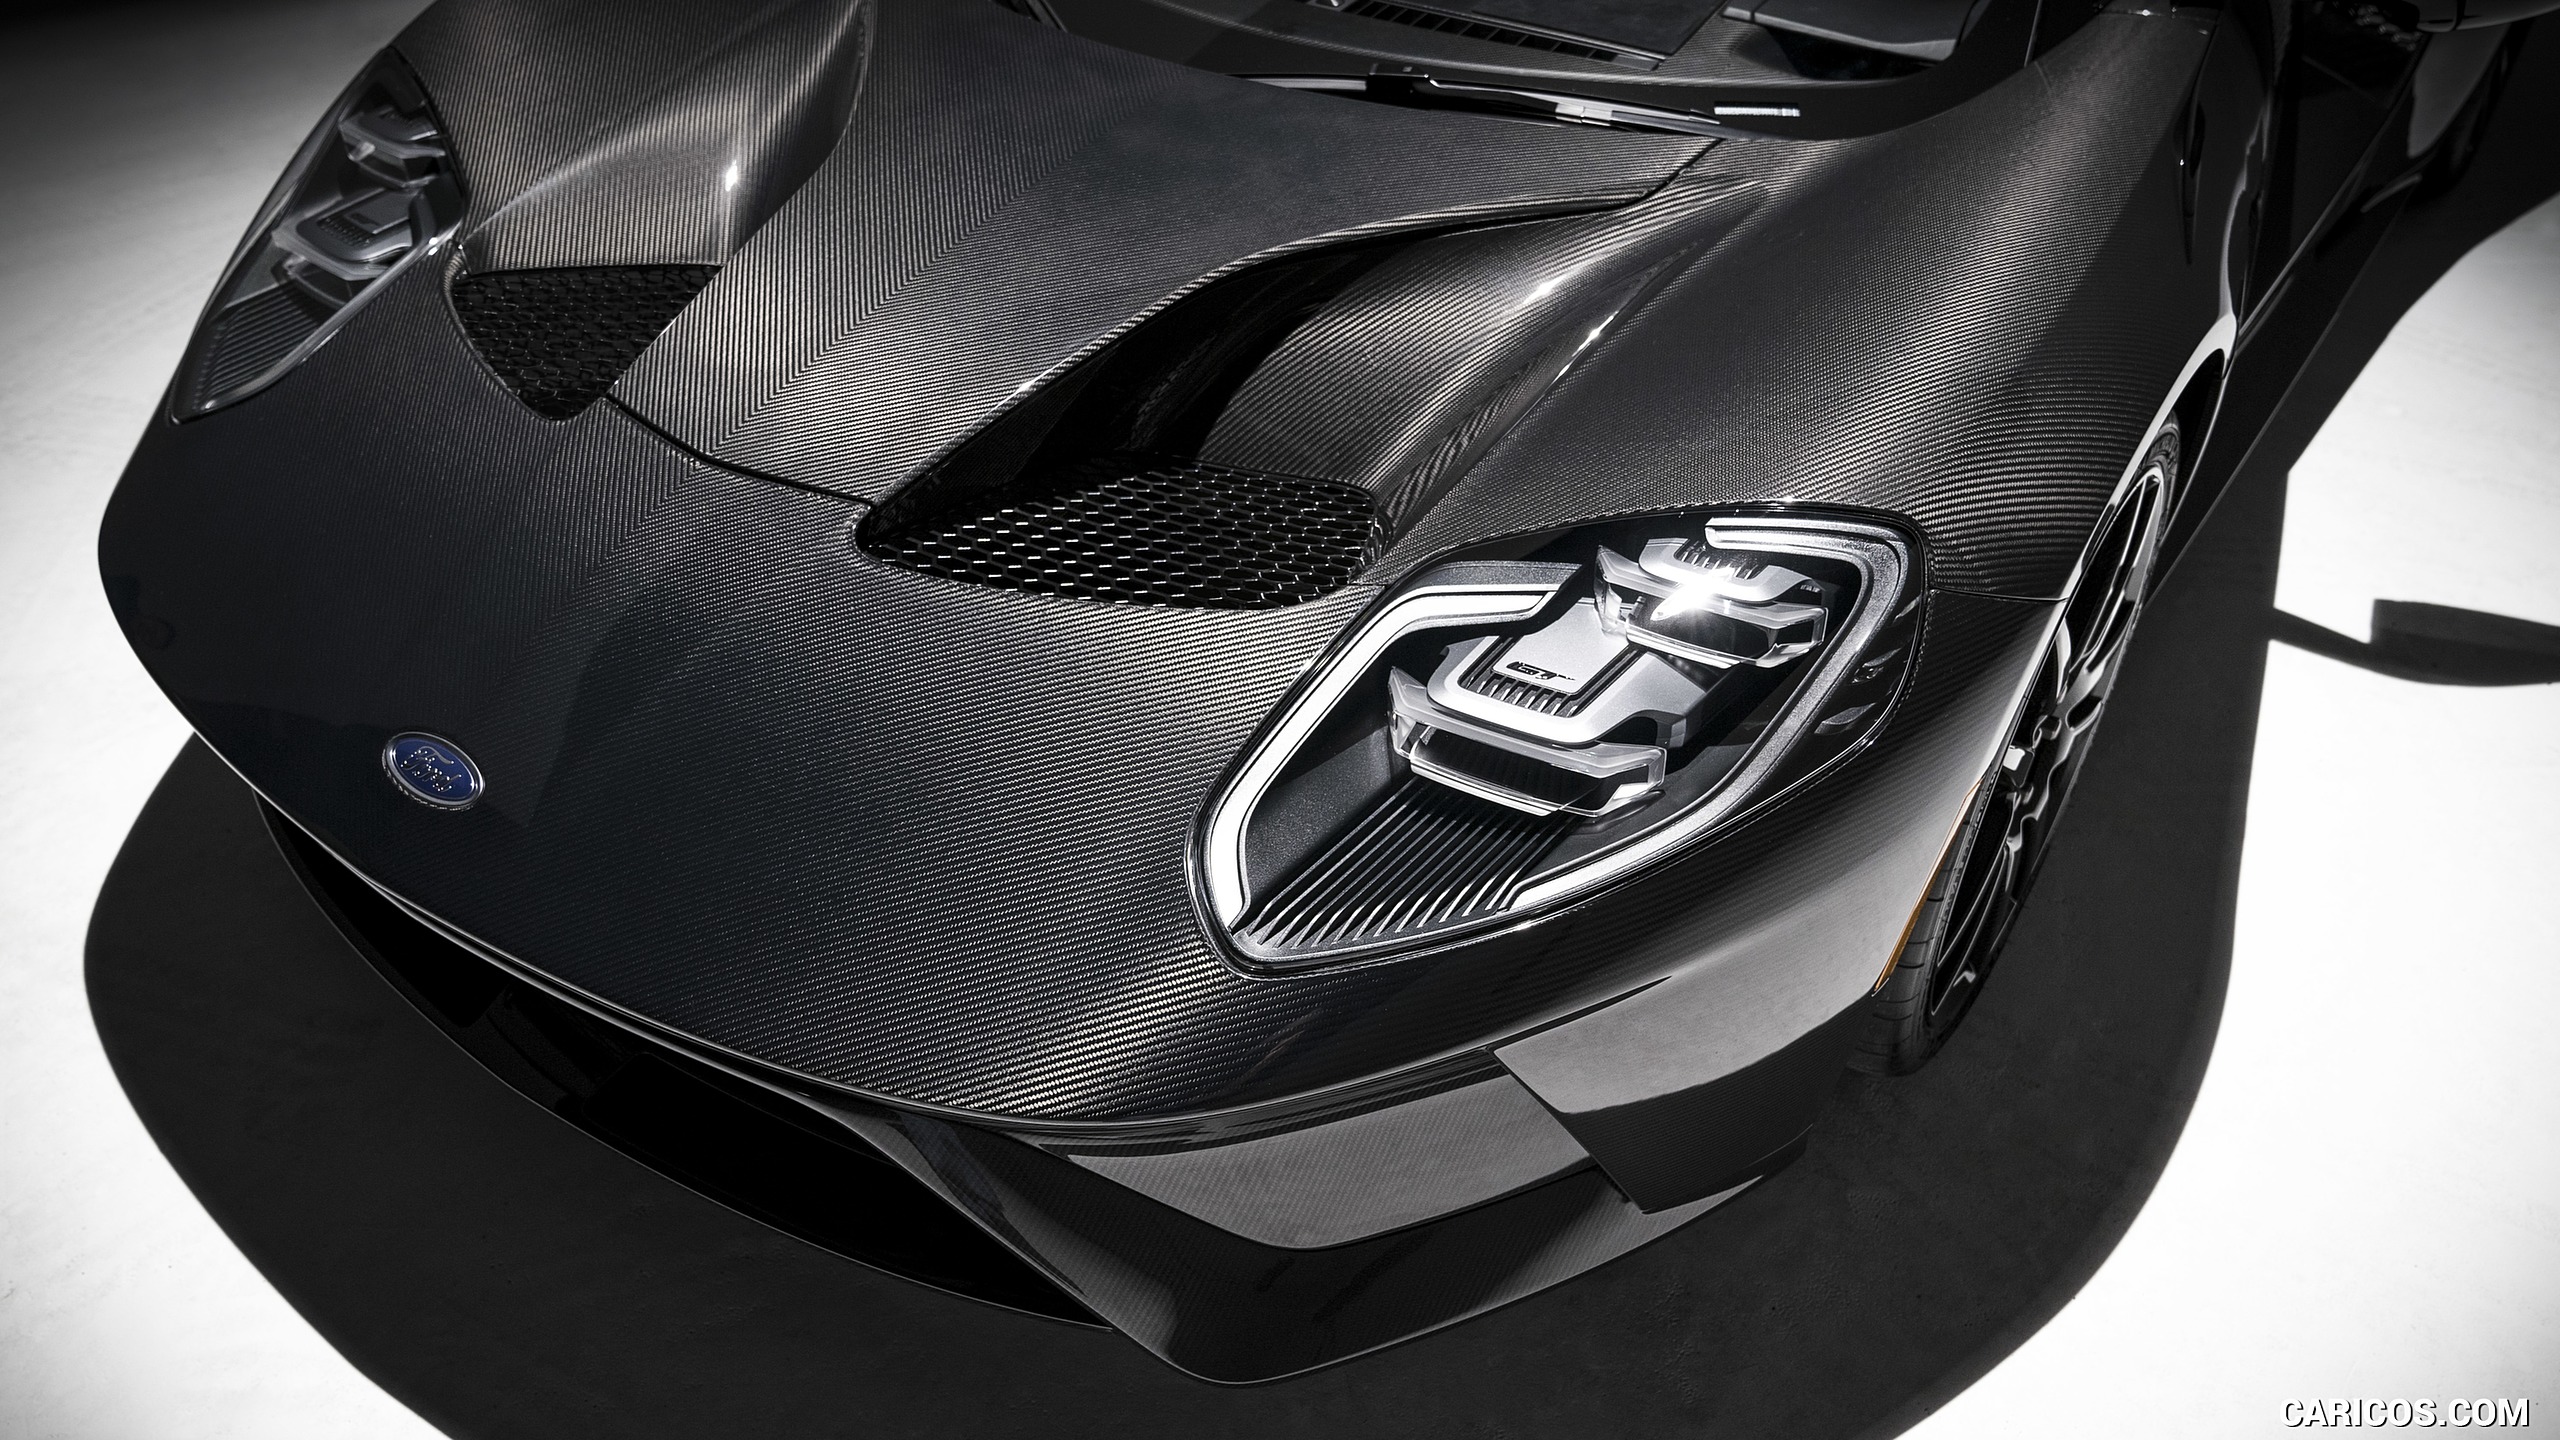 32 2020 Ford Gt Liquid Carbon Wallpapers On Wallpapersafari